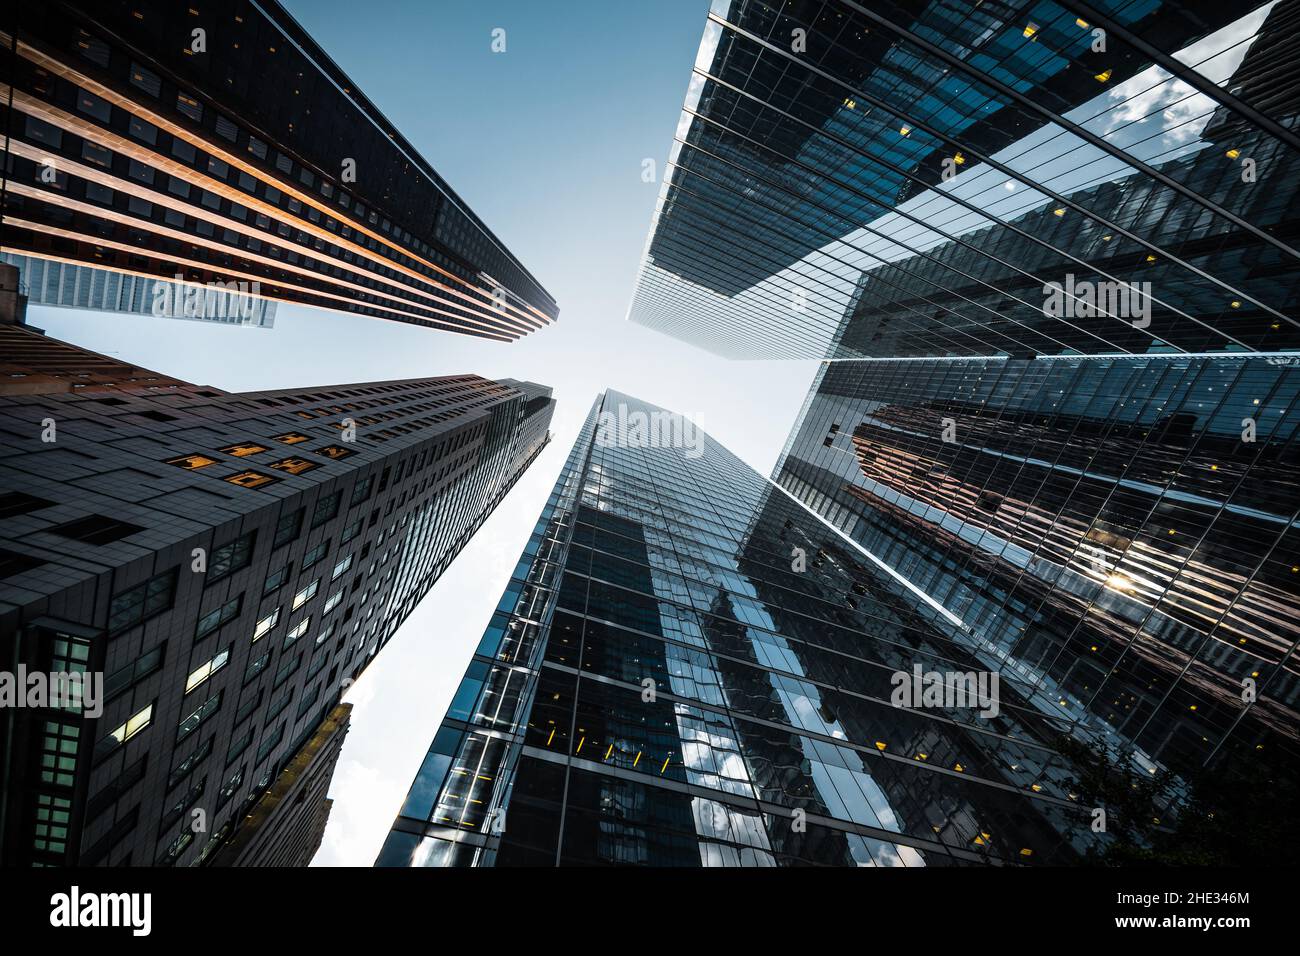 Business and finance concept, looking up at high rise buildings in the financial district of a modern metropolis. Stock Photo